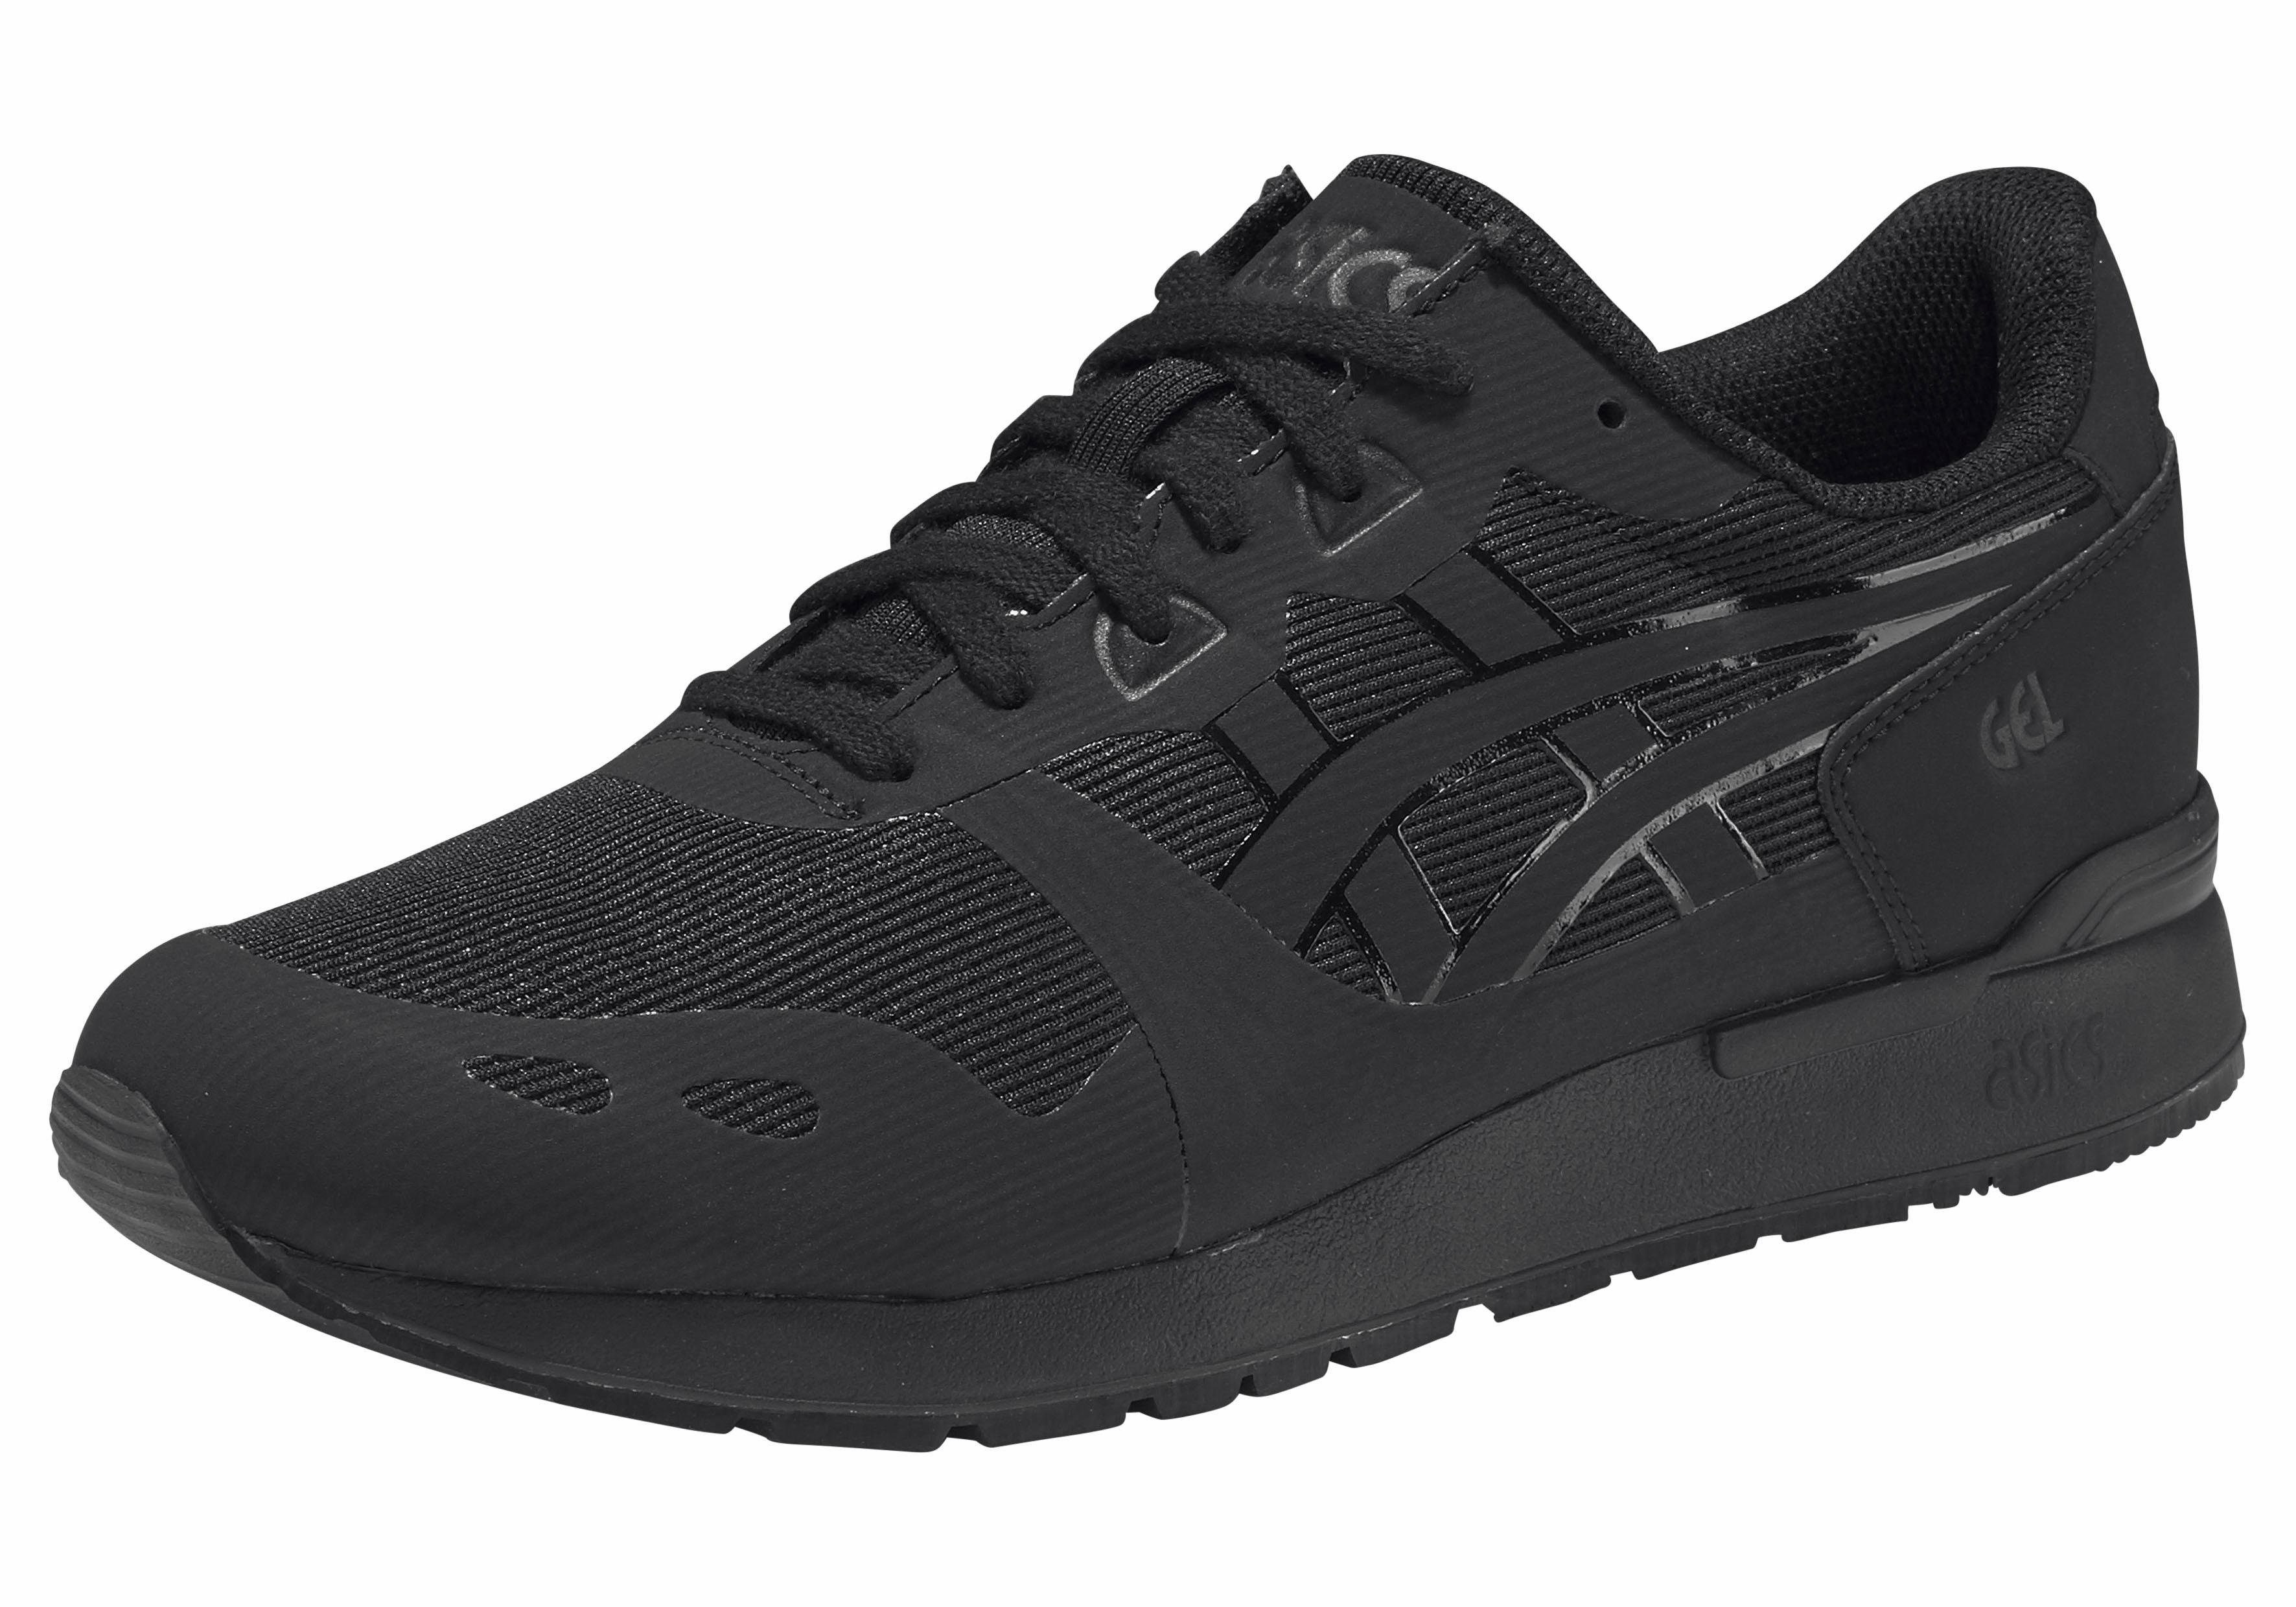 Otto - Asics Tiger NU 15% KORTING: Asics sneakers GEL-LYTE NS